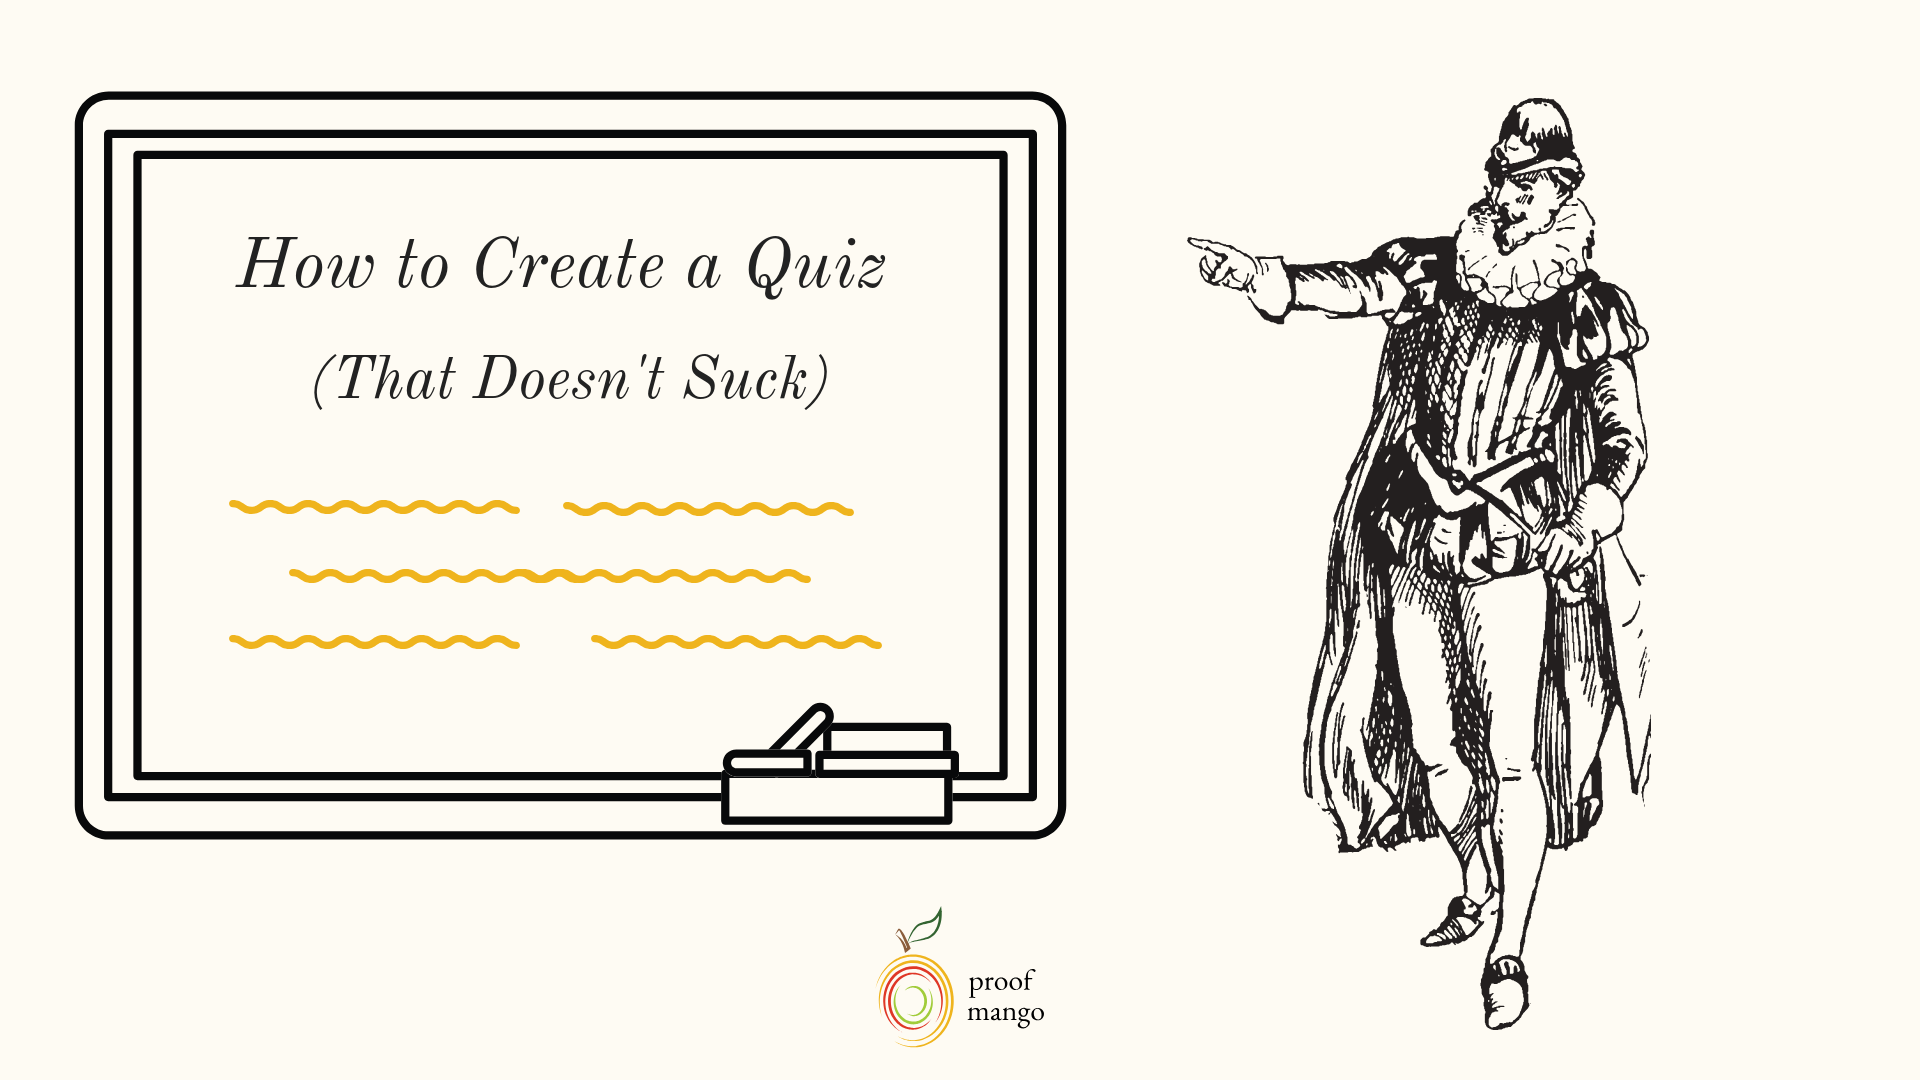 How to Create a Quiz in Your Online Course That Doesn't Suck